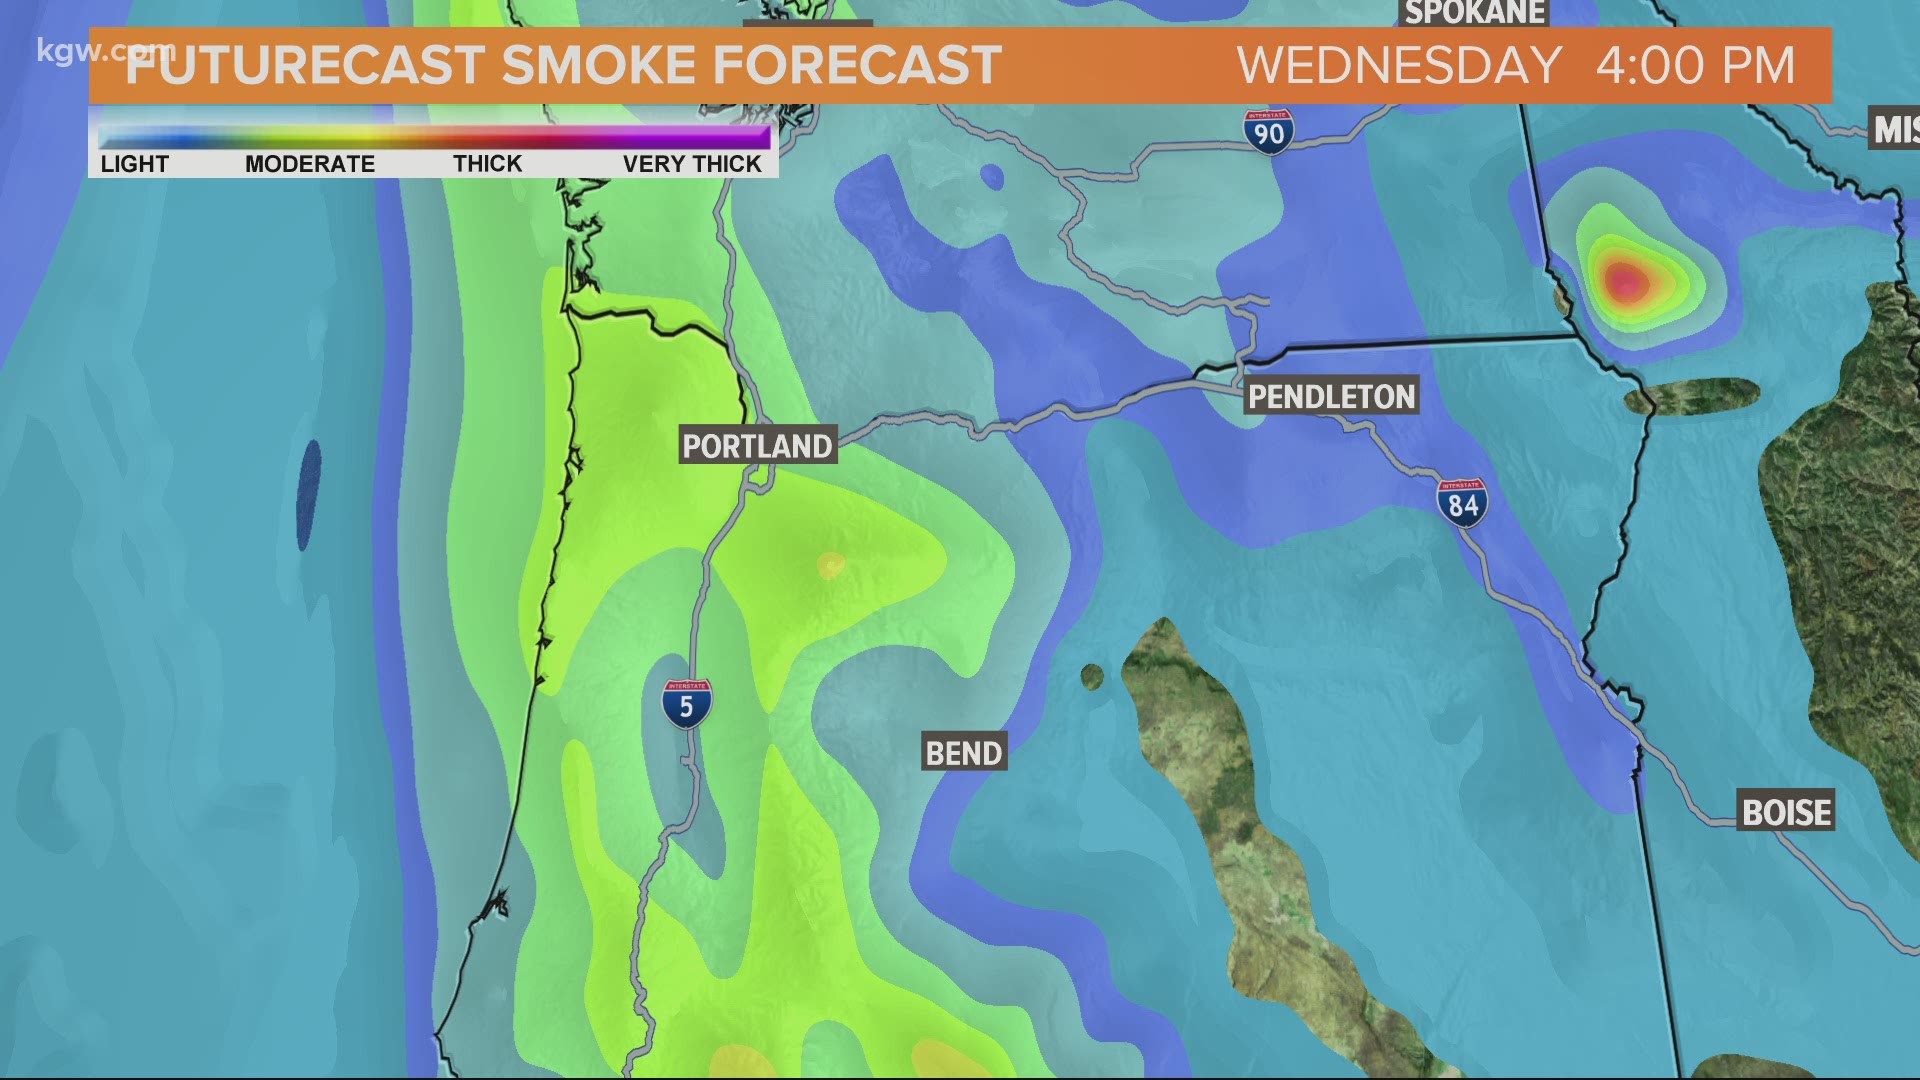 There could be enough smoke to see the air quality deteriorate into the moderate zone.